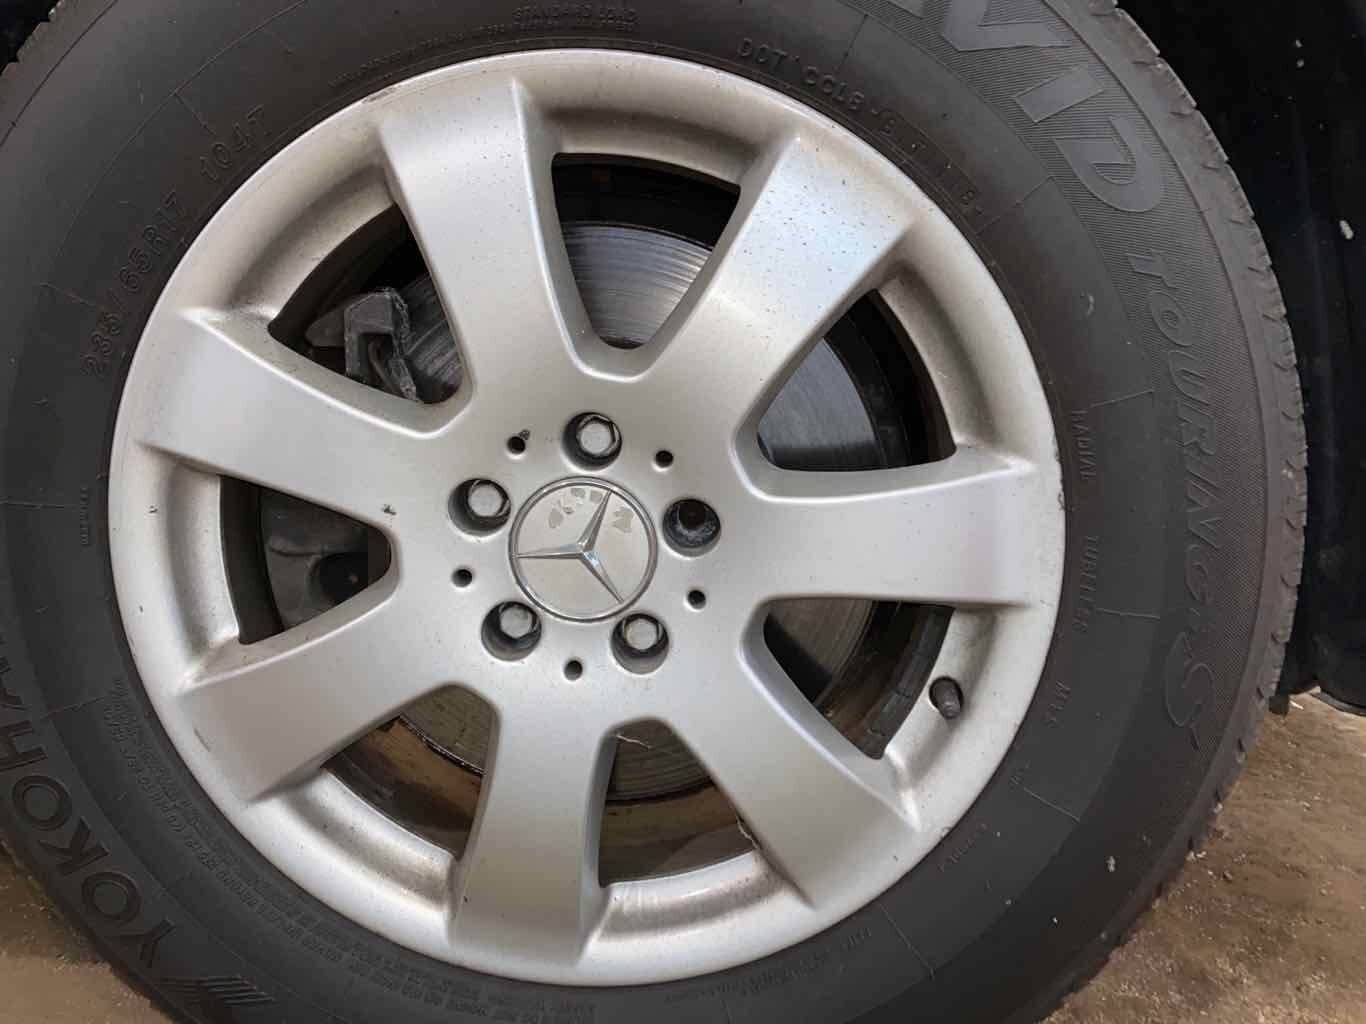 Used Wheel fits: 2006 Mercedes-benz Mercedes r-class 164 Type ML320 17x7-1/2 7 s